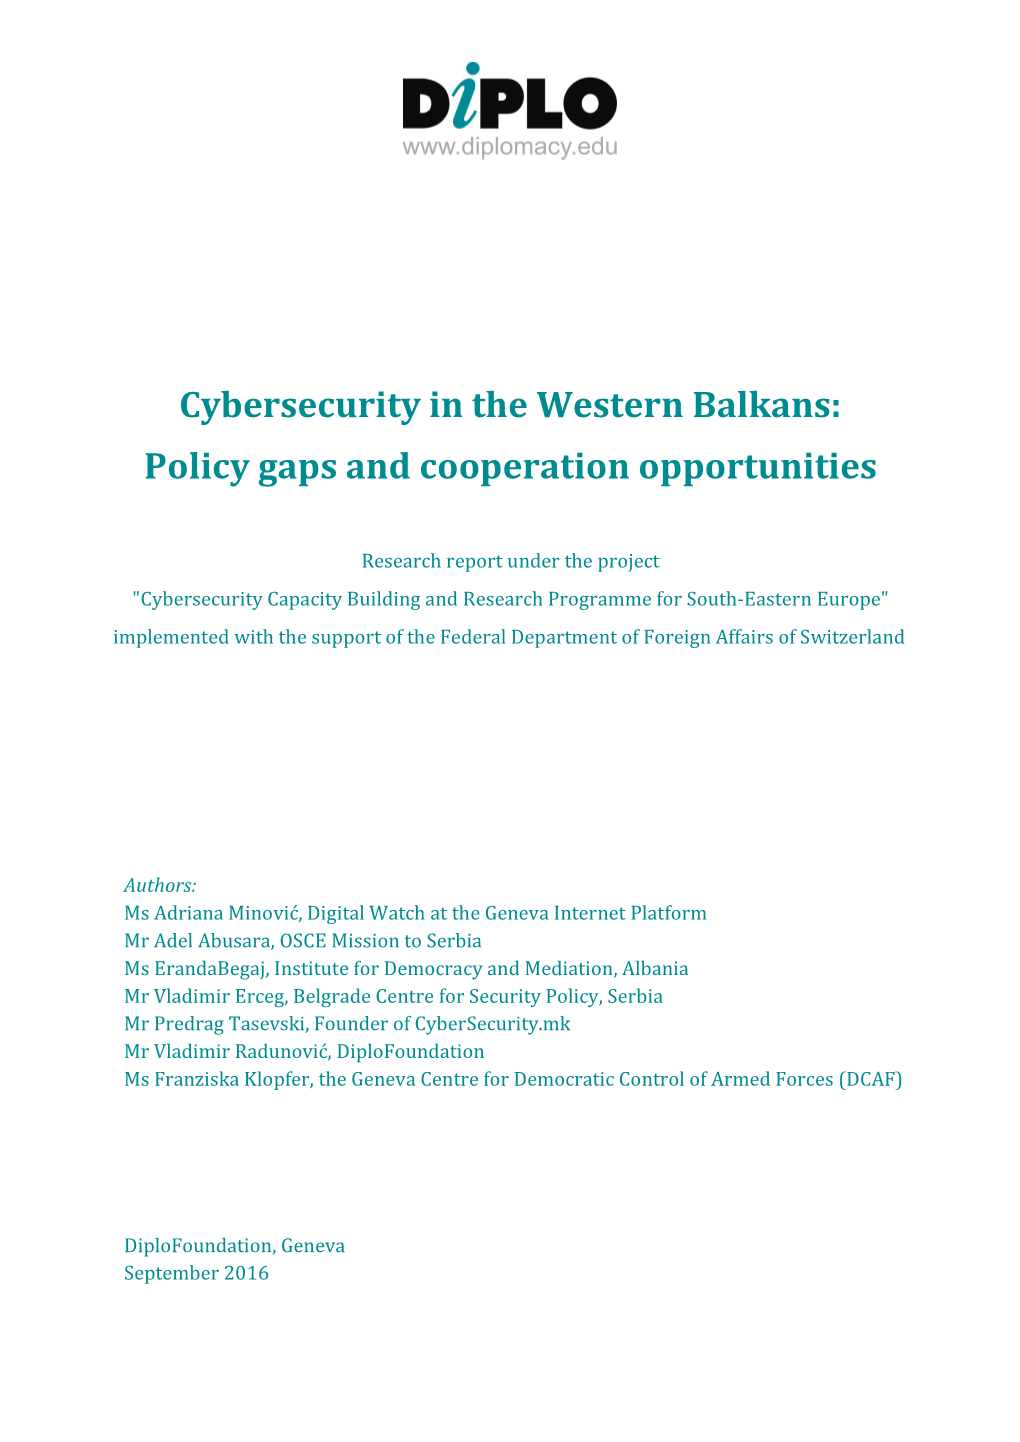 Cybersecurity in the Western Balkans: Policy Gaps and Cooperation Opportunities